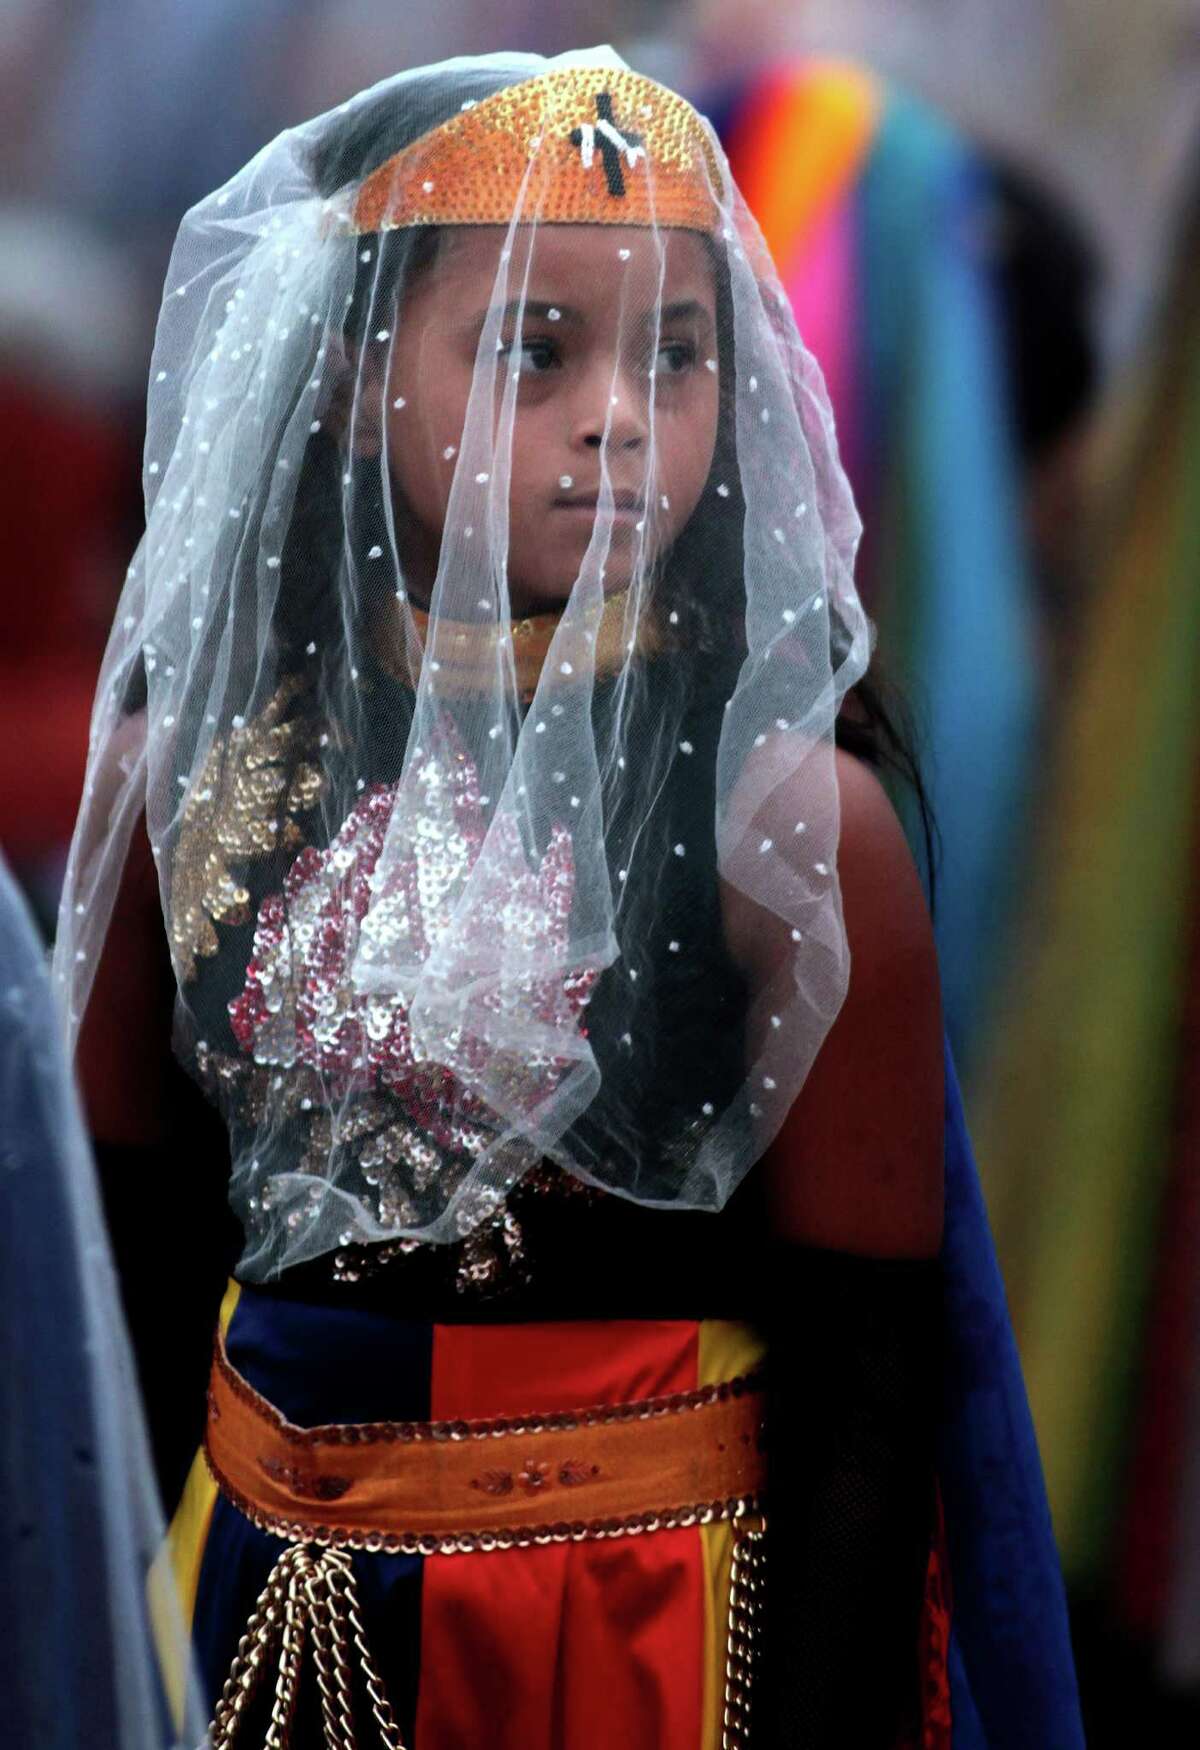 A girl attends the ritual of the ellipse at the annual festival of the Vale do Amanhecer, or Sunrise Valley Festival, in Planaltina, Brazil, Tuesday, May 1, 2012. Vale do Amanhecer is a spiritual community founded in 1959 by the medium Tia Neiva and its doctrine contains elements from Christianity, Spiritualism, Mysticism, Afro-Brazilian religions and ancient Egyptian beliefs. The community has more than 600 temples throughout Brazil and other countries. (AP Photo/Eraldo Peres)